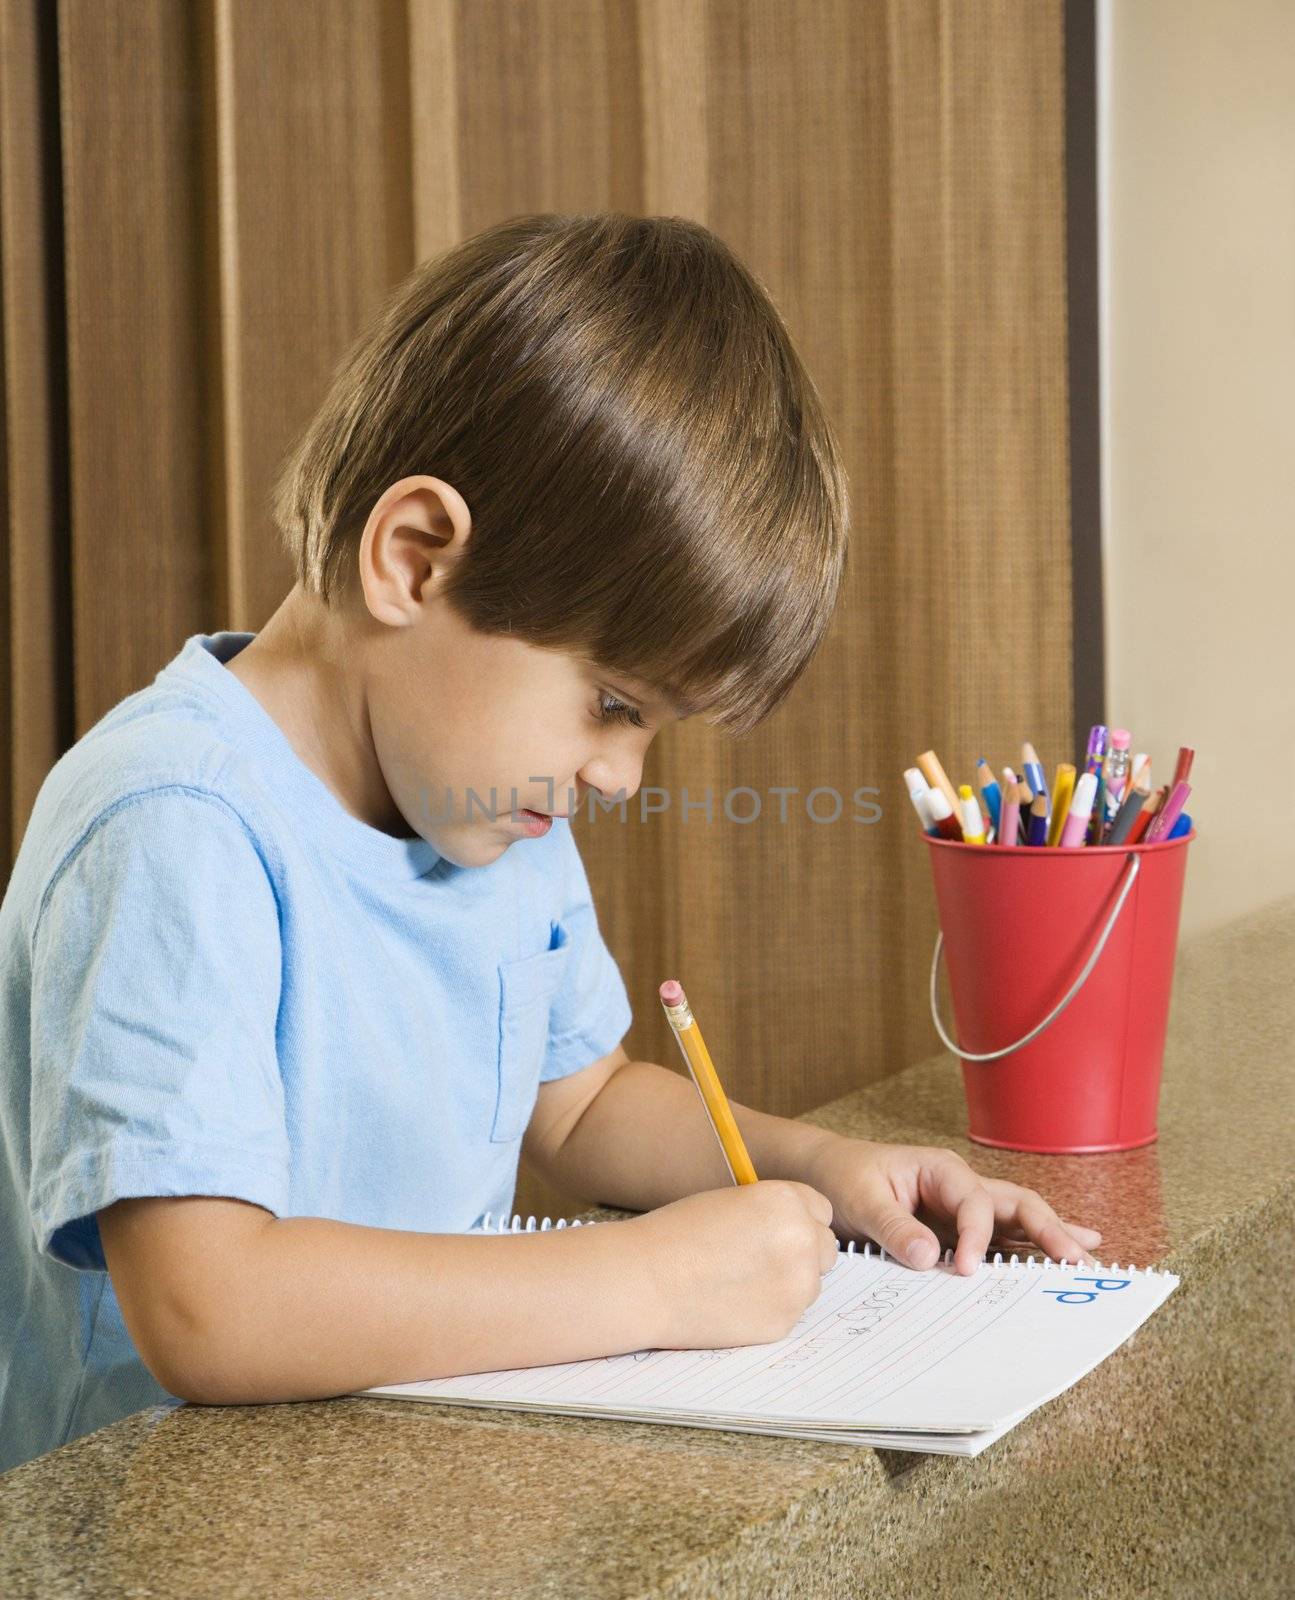 Side view of Hispanic boy concentrating on homework.